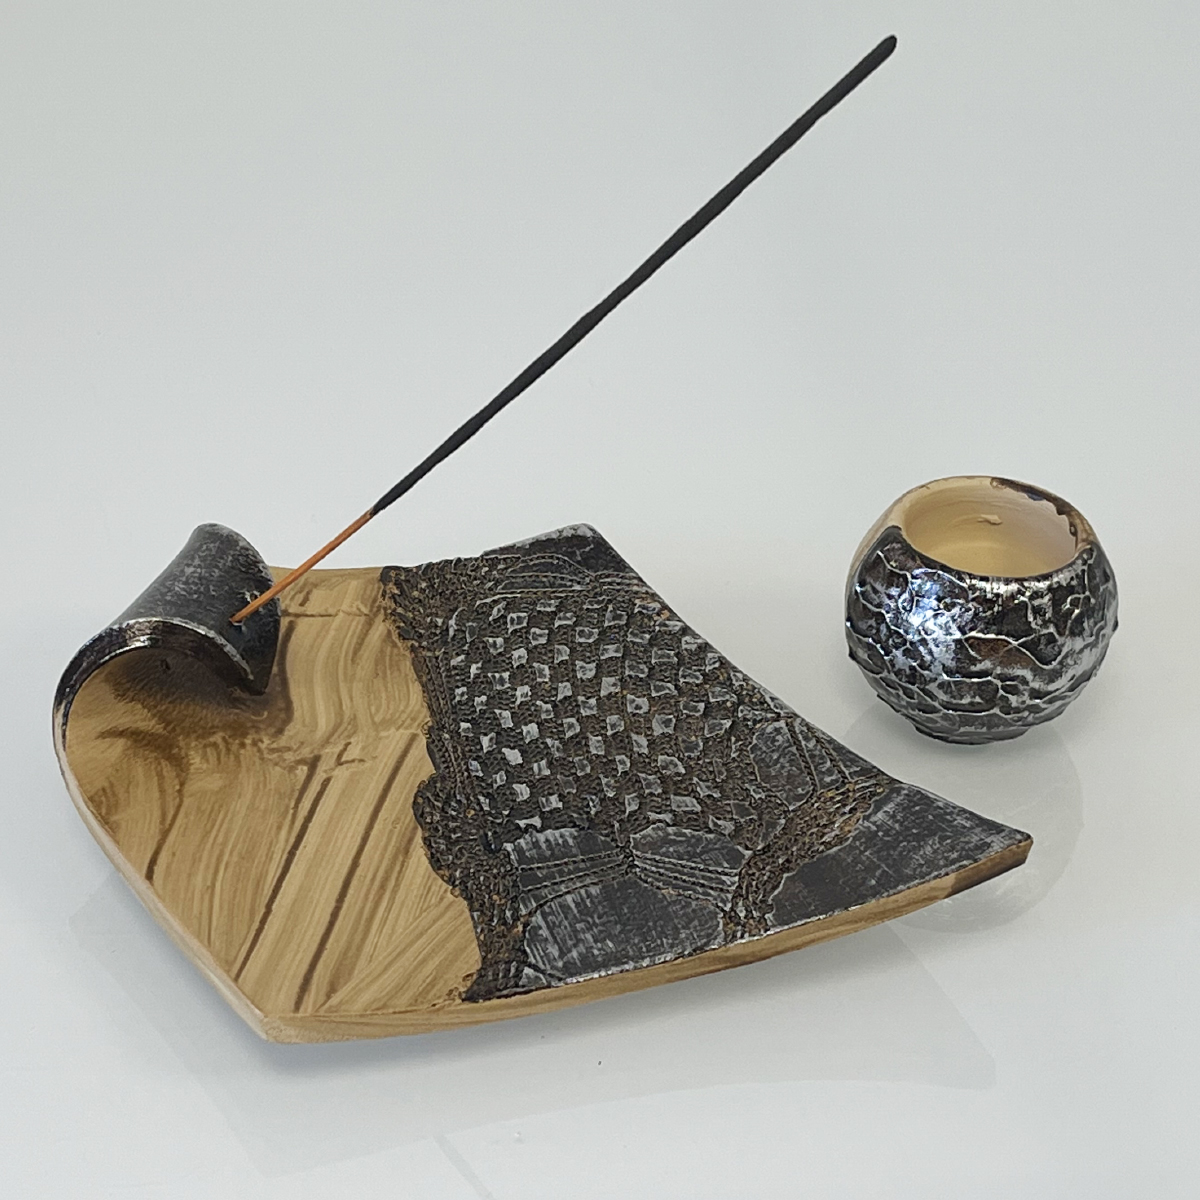 Handmade incense holder for sticks, cones and charcoal